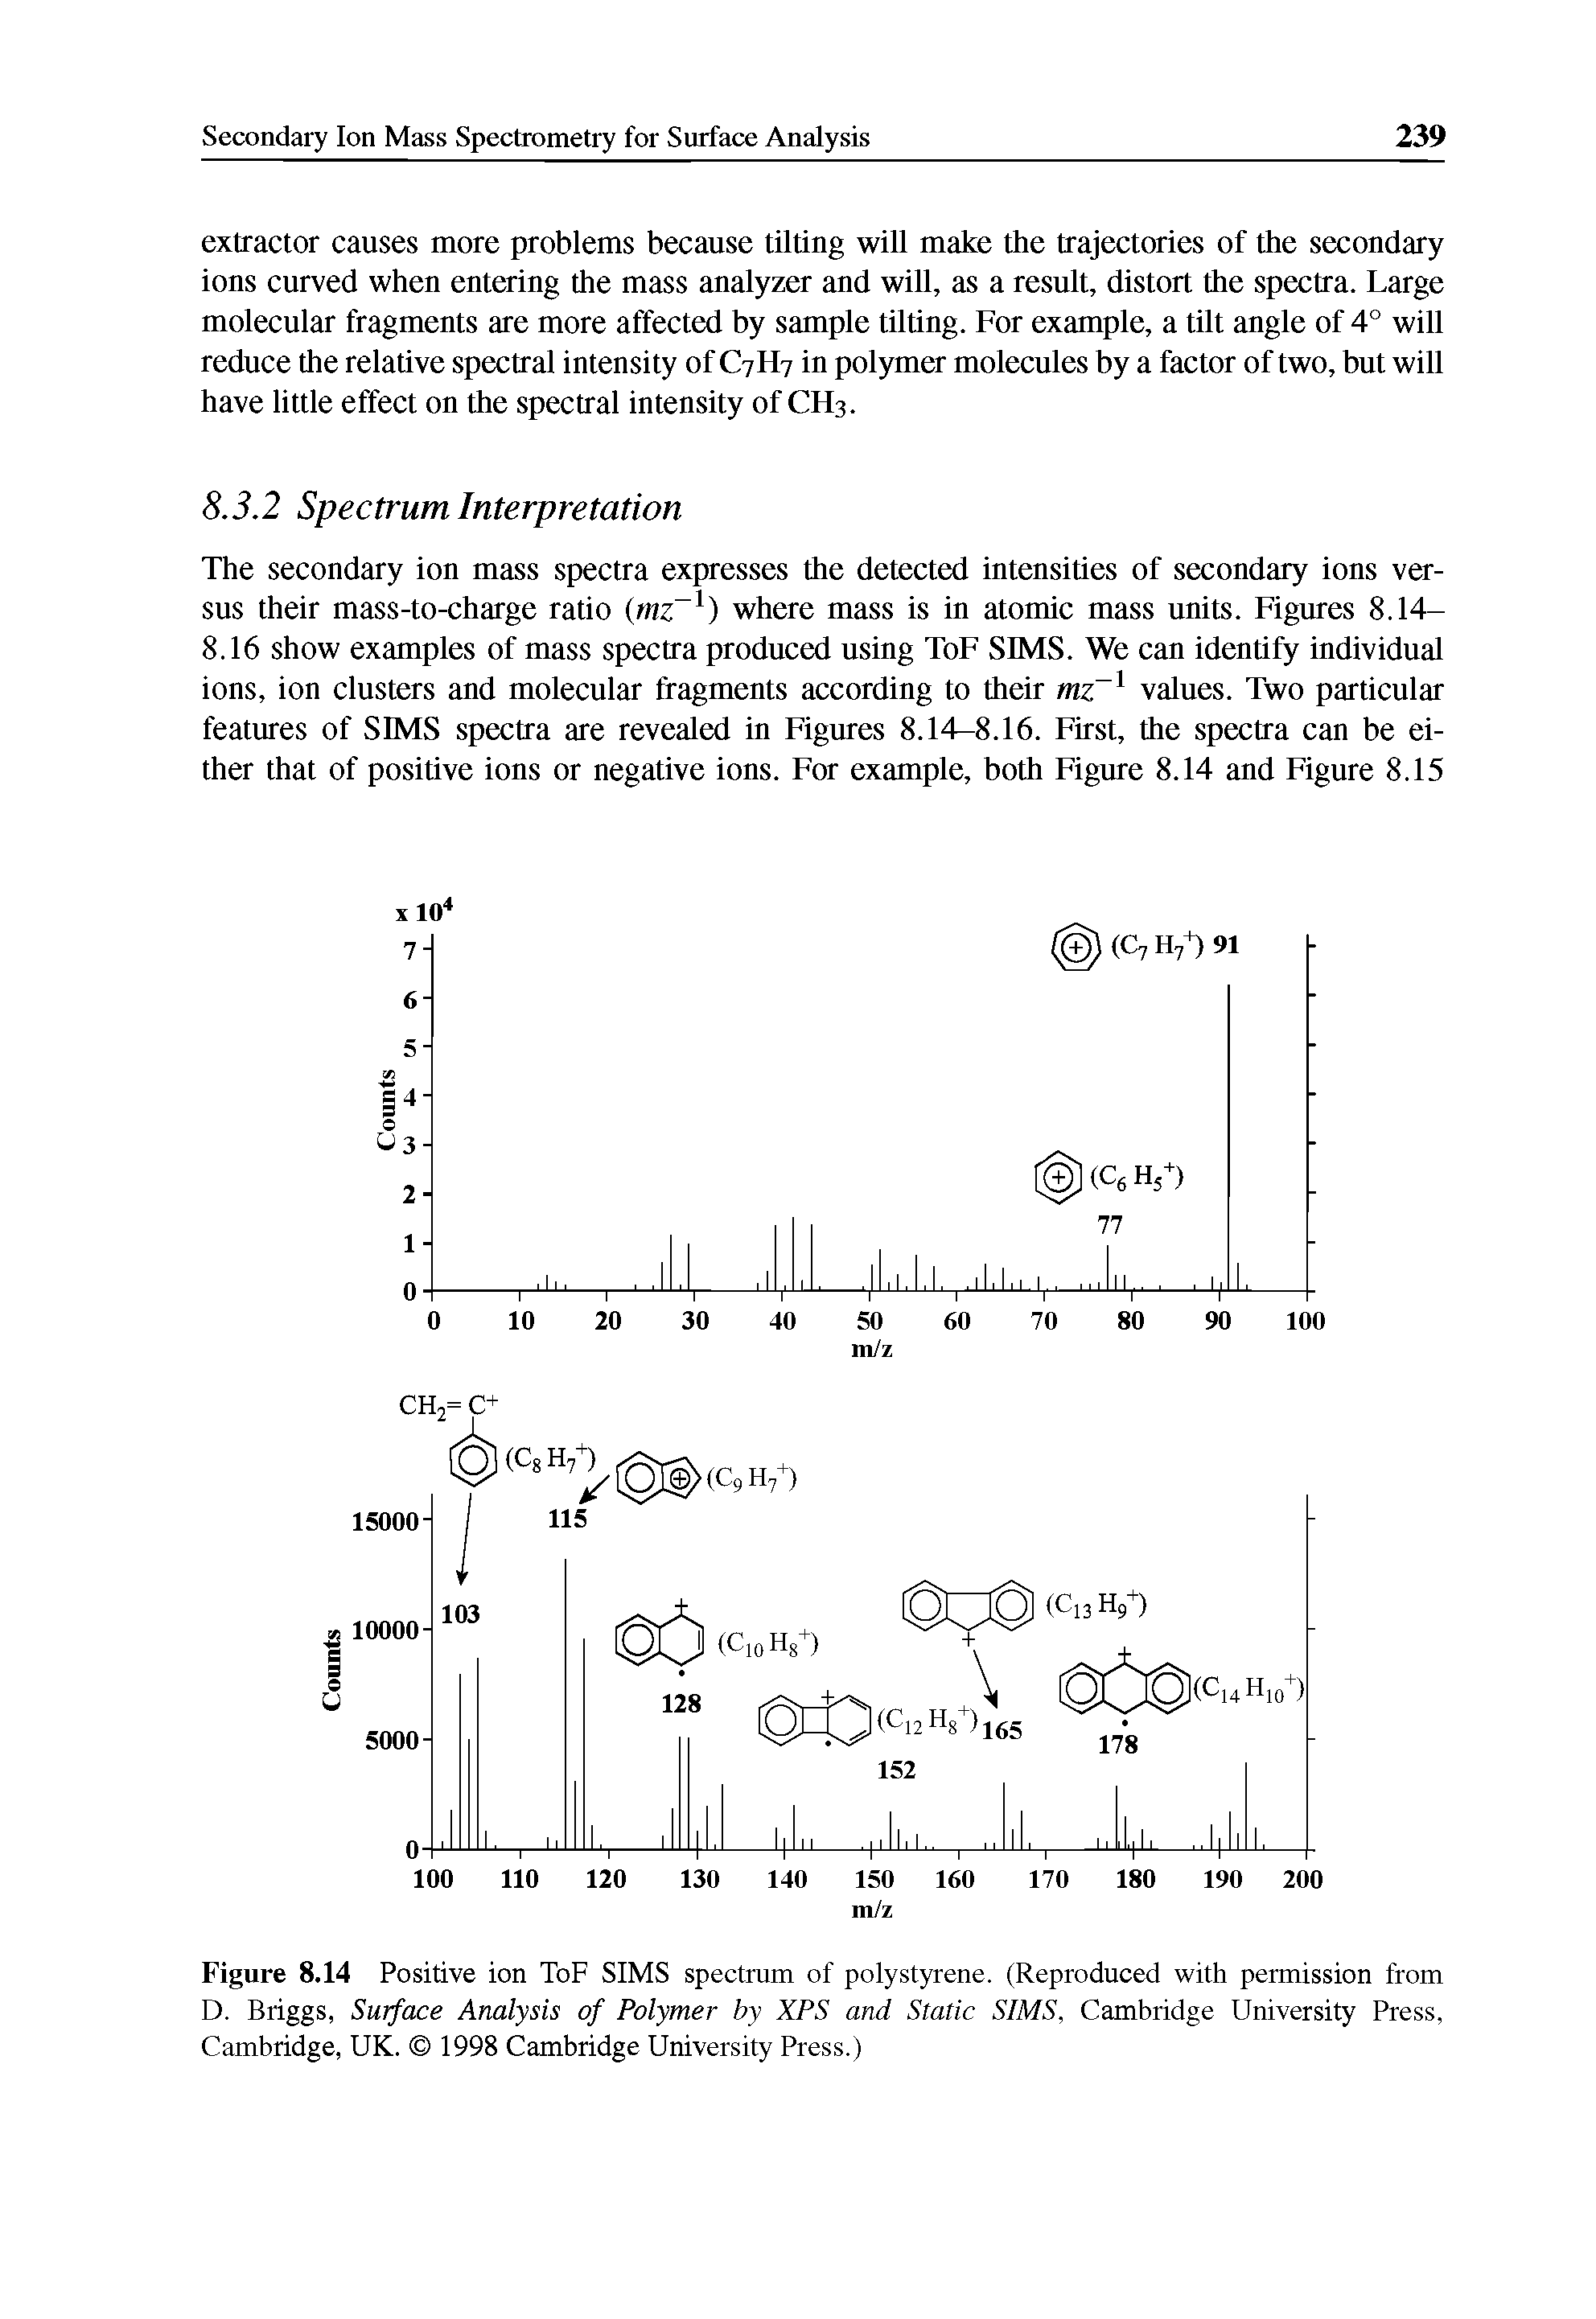 Figure 8.14 Positive ion ToF SIMS spectrum of polystyrene. (Reproduced with permission from D. Briggs, Surface Analysis of Polymer by XPS and Static SIMS, Cambridge University Press, Cambridge, UK. 1998 Cambridge University Press.)...